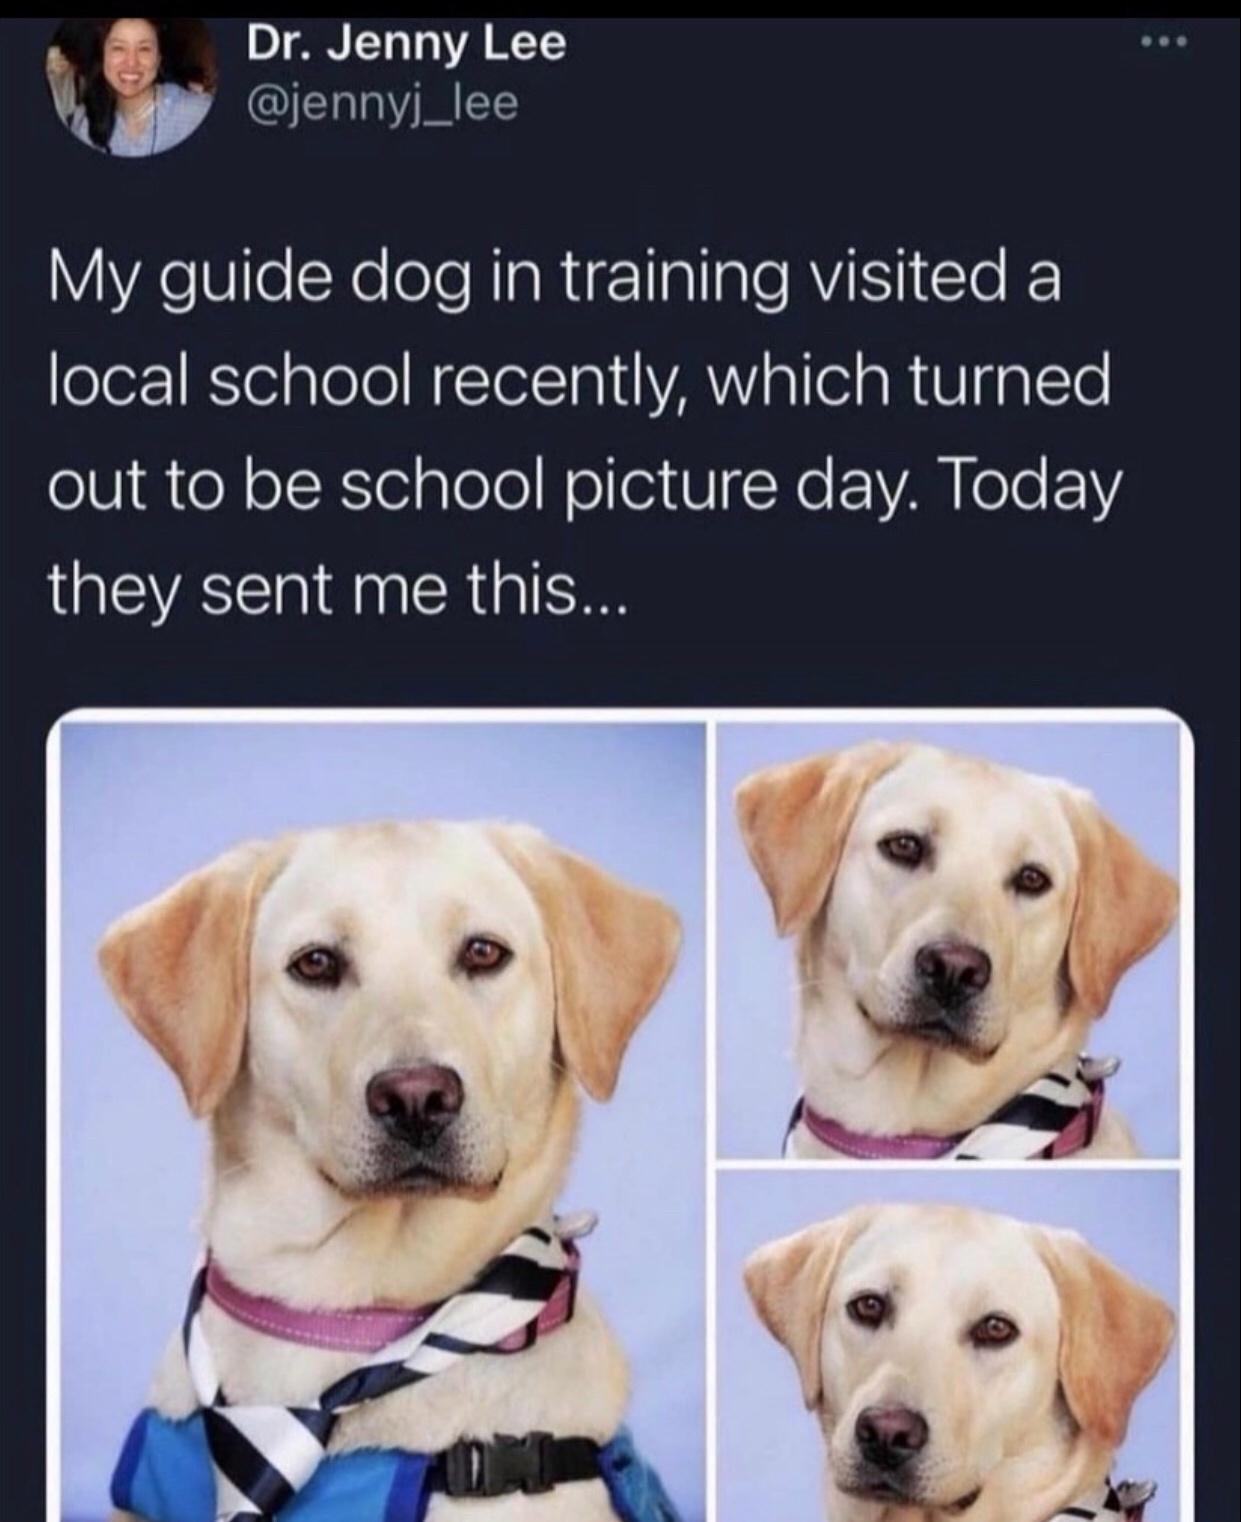 funny memes and random pics - Dr. Jenny Lee My guide dog in training visited a local school recently, which turned out to be school picture day. Today they sent me this...